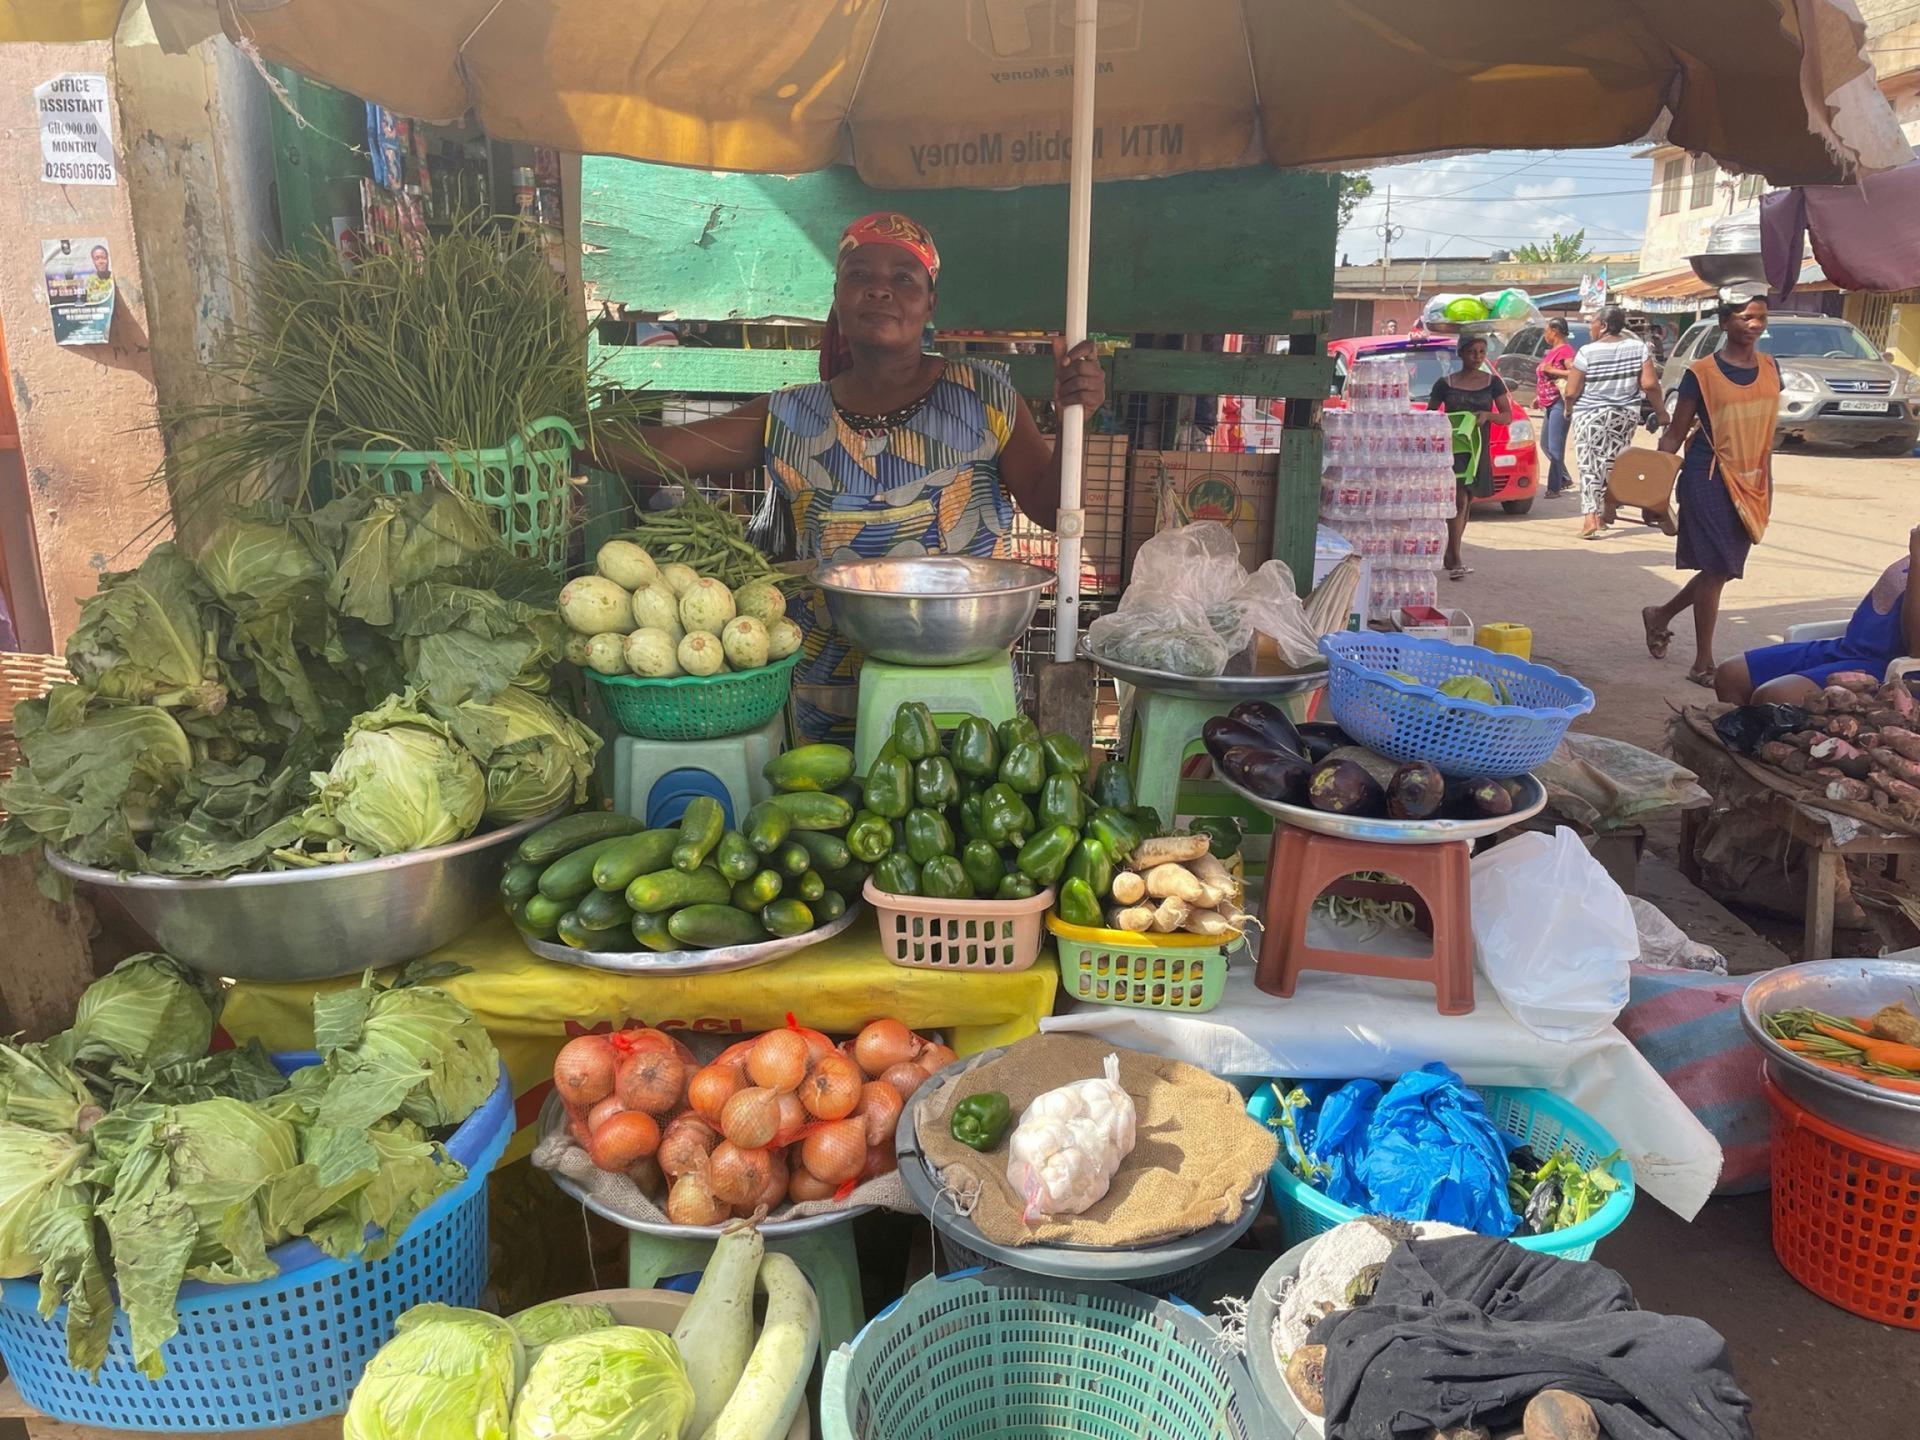 Yaa Asantewaa laments how farmers in Ghana and across Africa have been affected by climate change, which has led to a scarcity of vegetables that now have to be sold at higher costs.